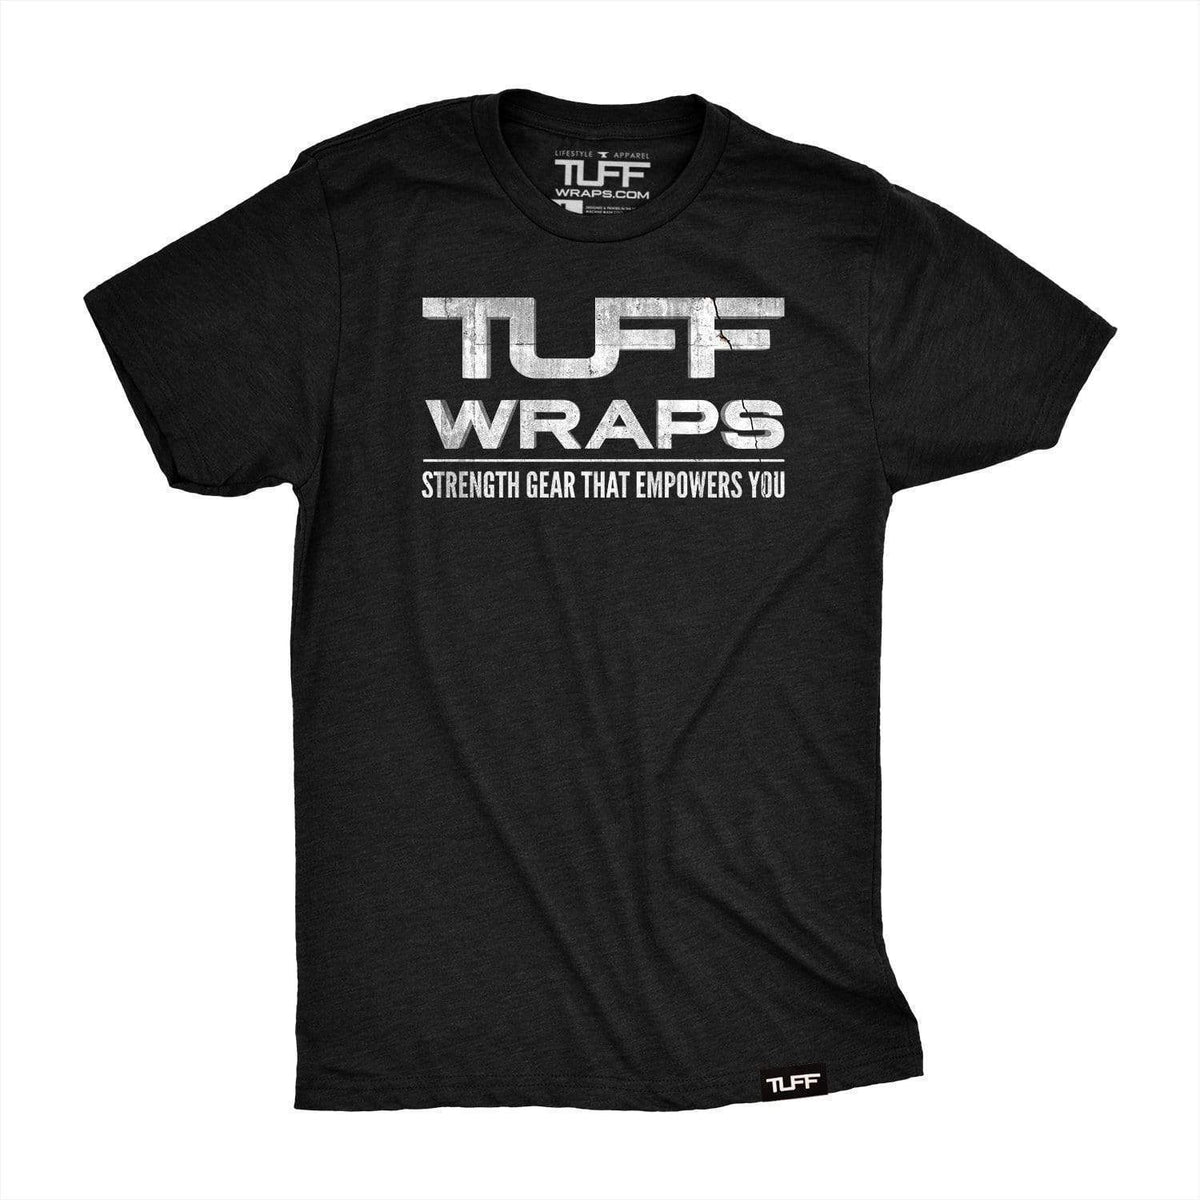 TuffWraps Strength Gear That Empowers Me Tee T-shirt